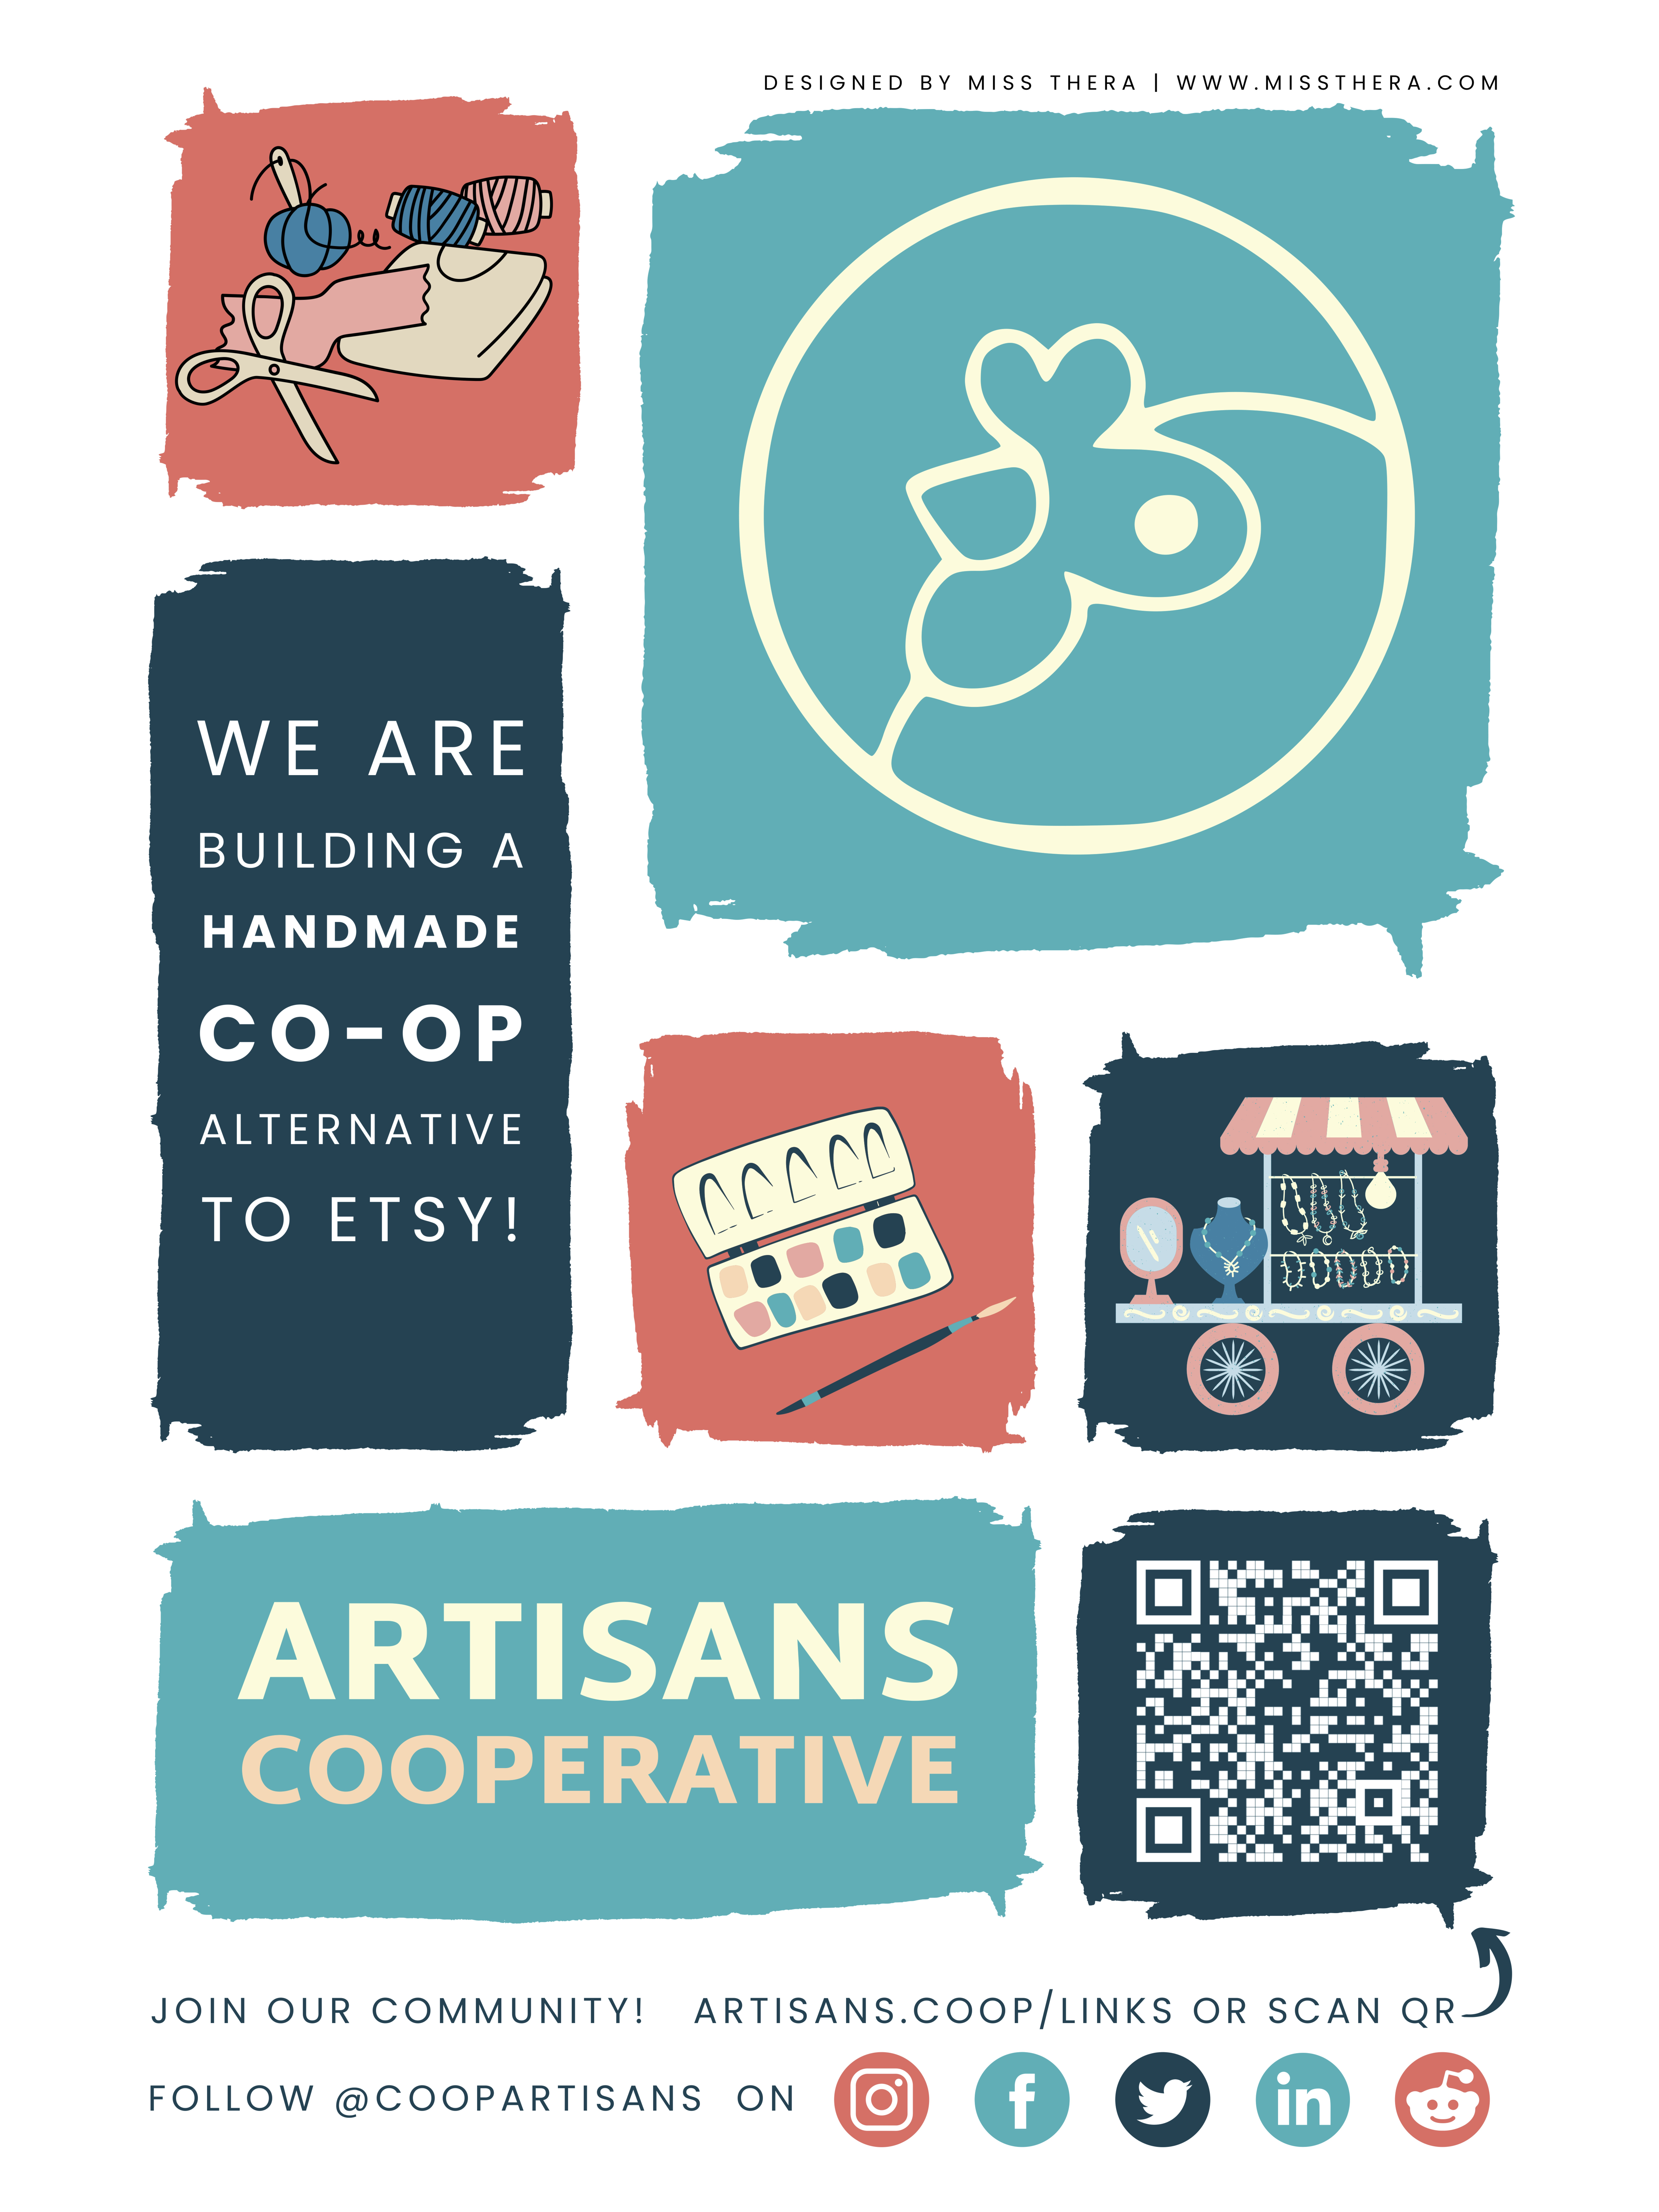 Retro flyer that says Artisans Cooperative in bright color blocks